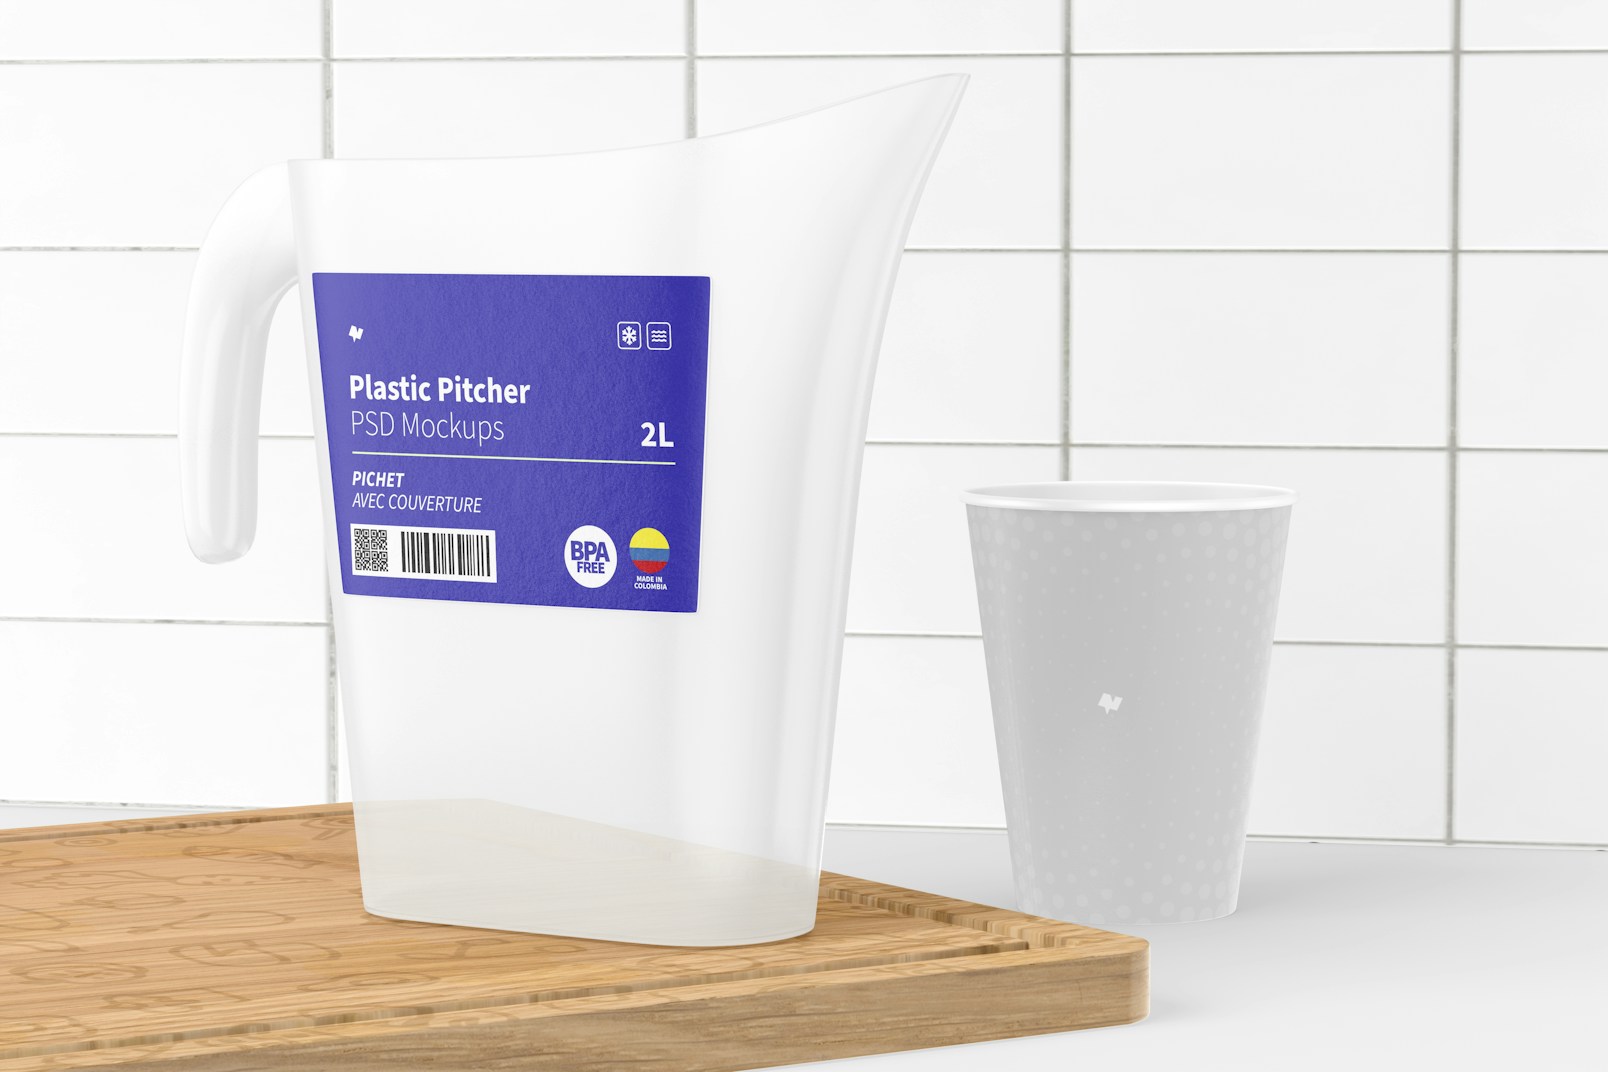 Plastic Pitcher with Wall Mockup